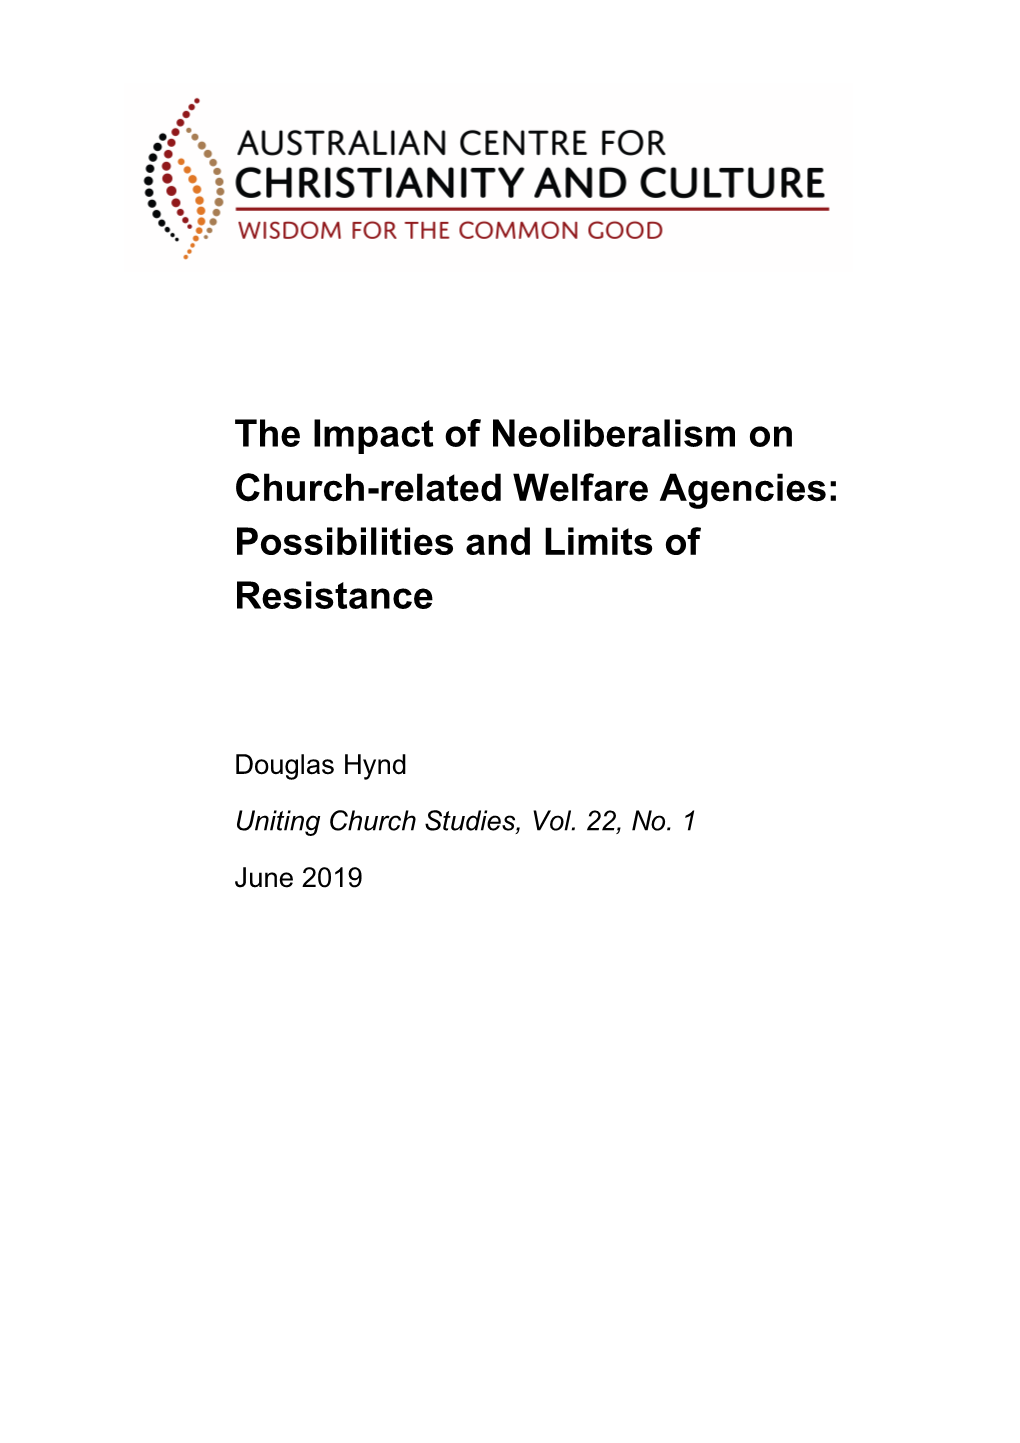 The Impact of Neoliberalism on Church-Related Welfare Agencies: Possibilities and Limits of Resistance